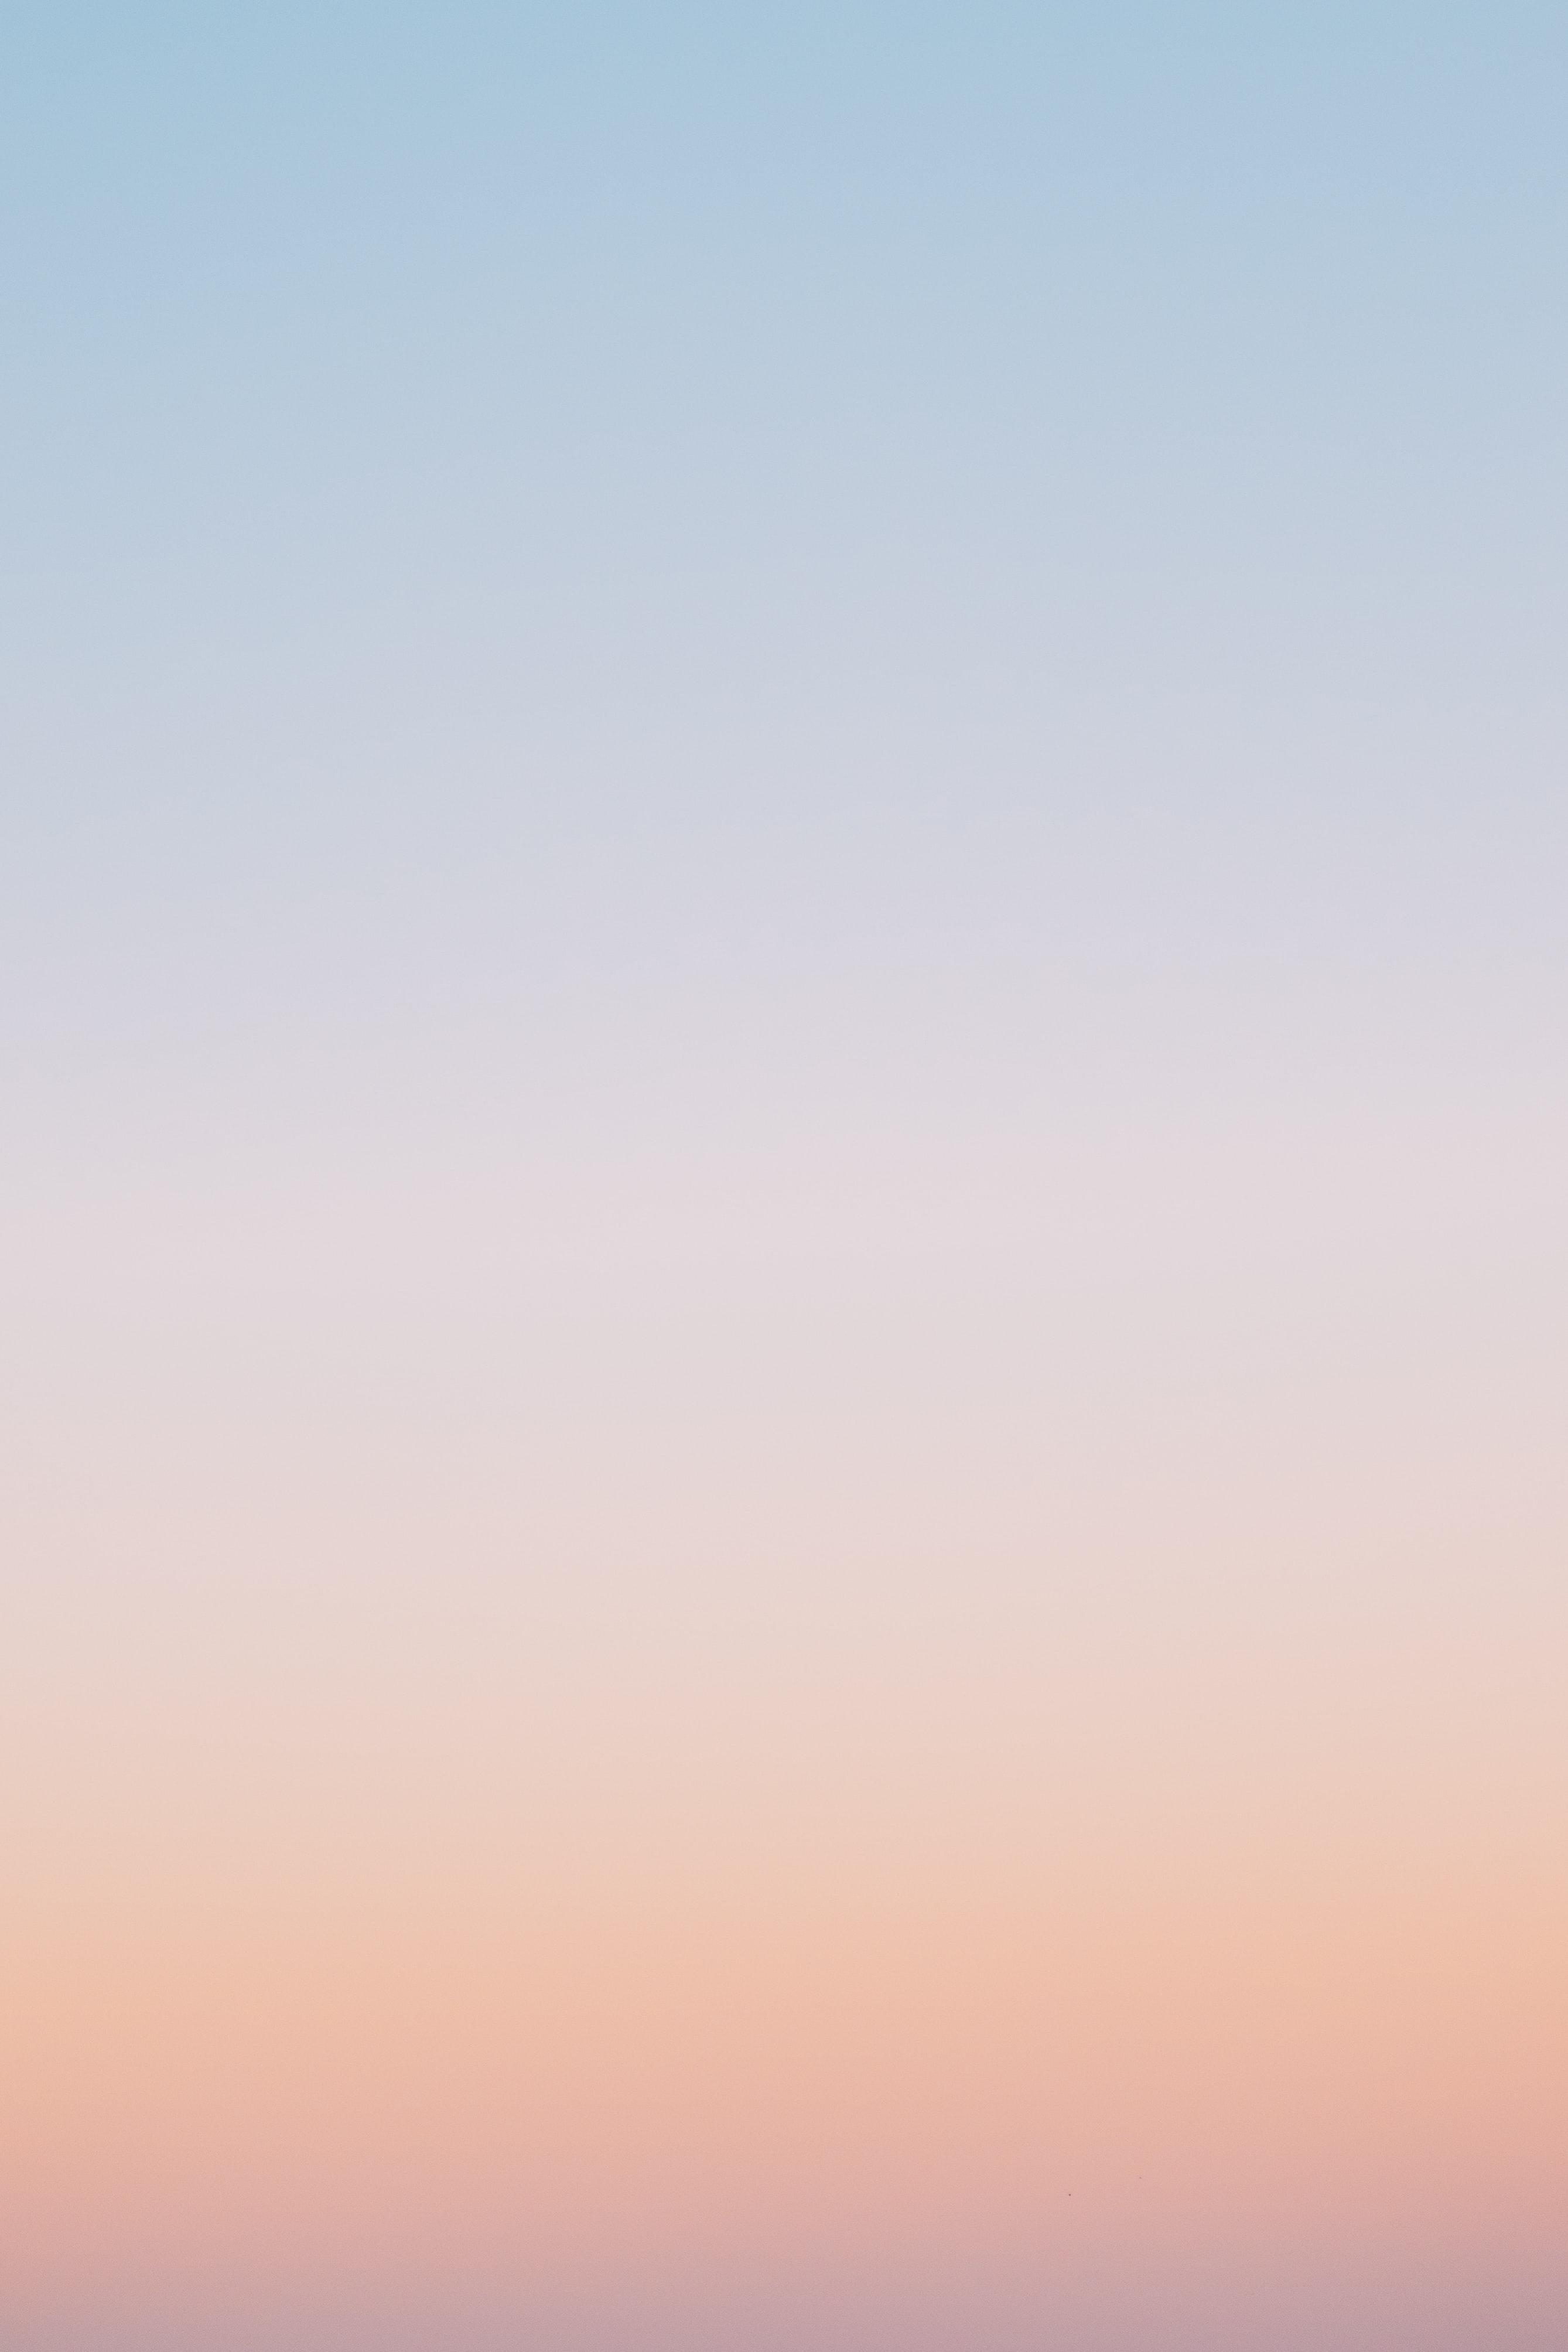 Download PC Wallpaper gradient, abstract, background, sky, pink, blue